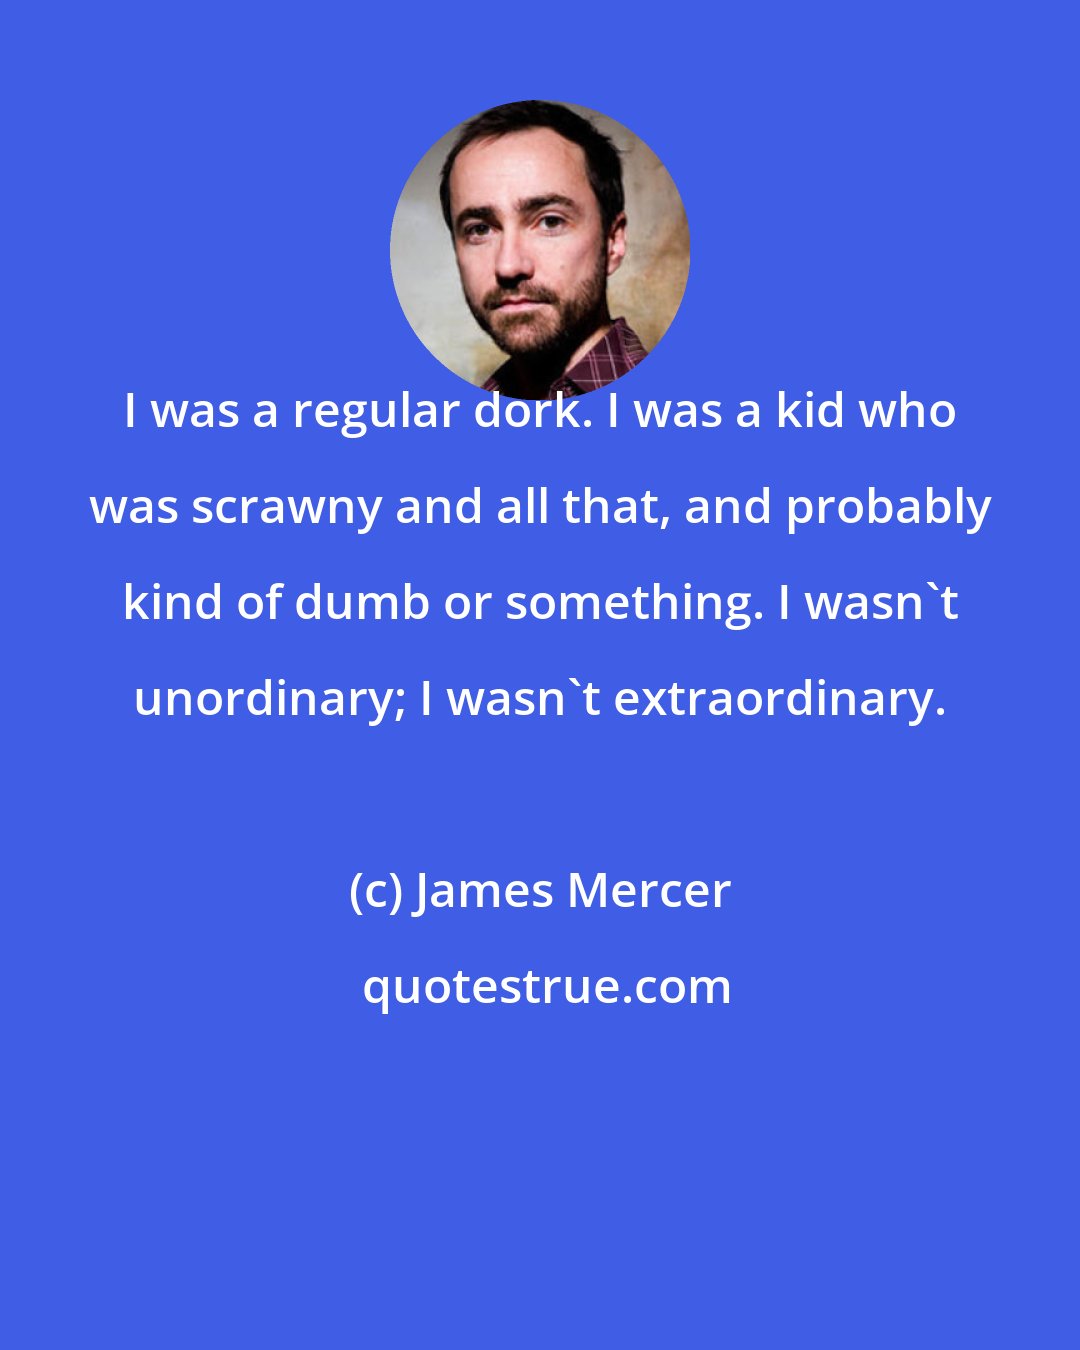 James Mercer: I was a regular dork. I was a kid who was scrawny and all that, and probably kind of dumb or something. I wasn't unordinary; I wasn't extraordinary.